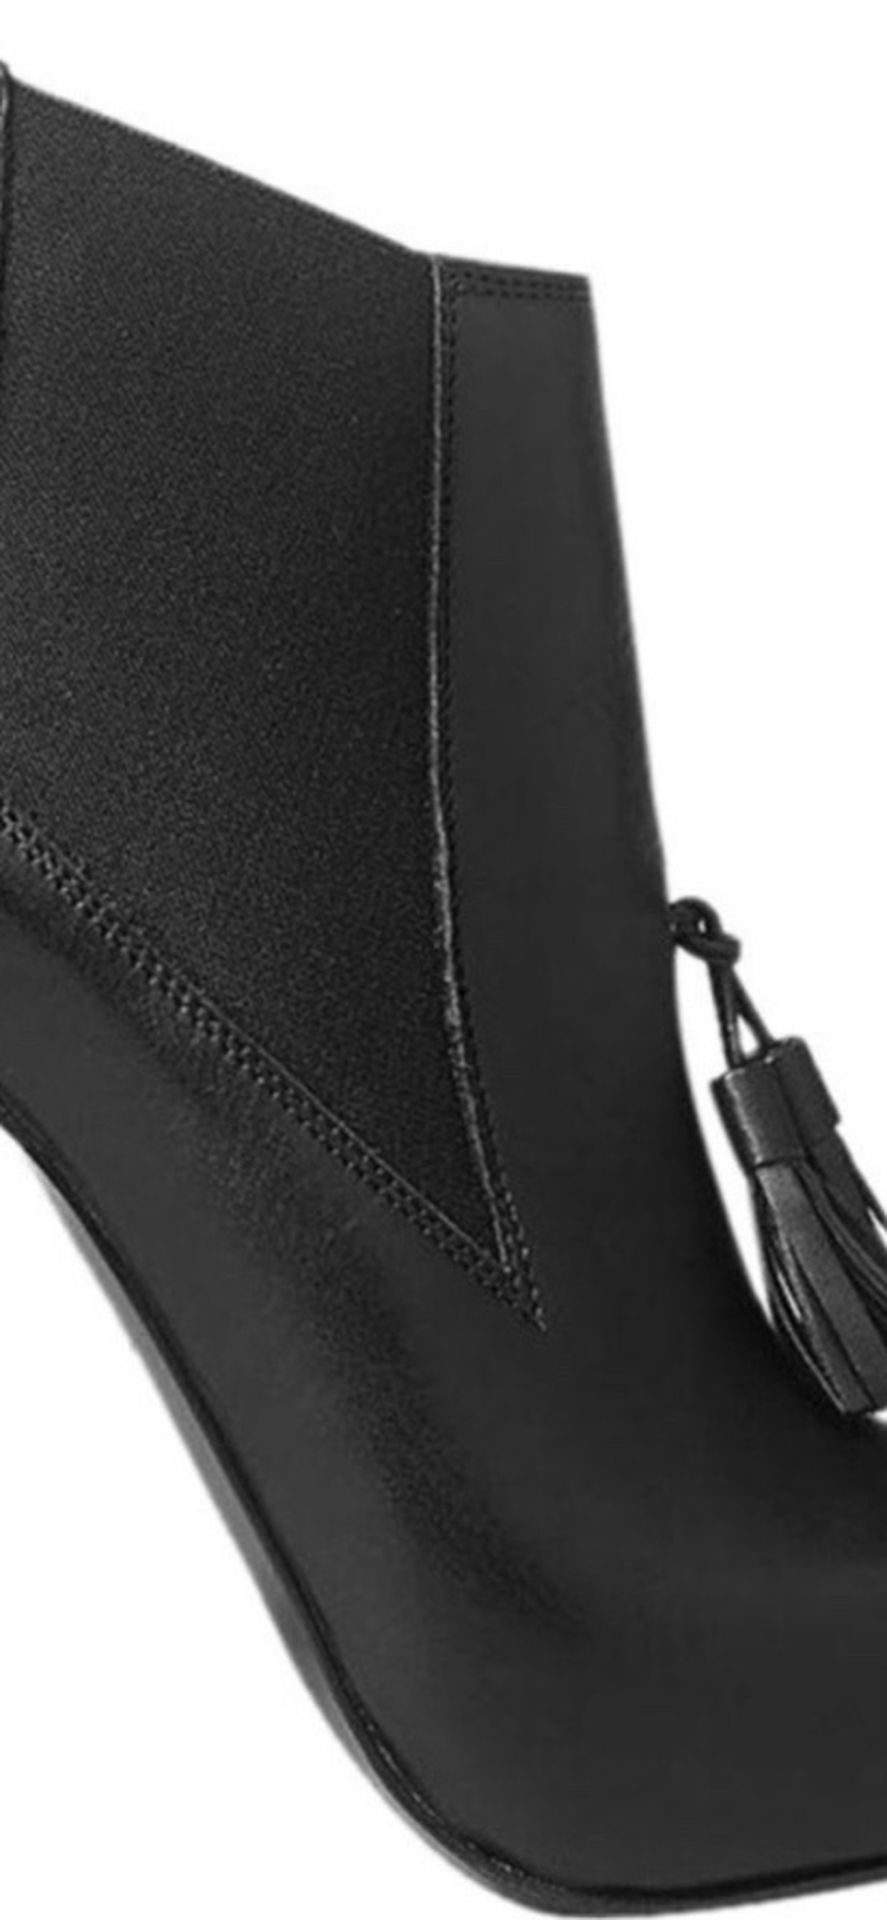 ALLSAINTS Black leather boots with heels